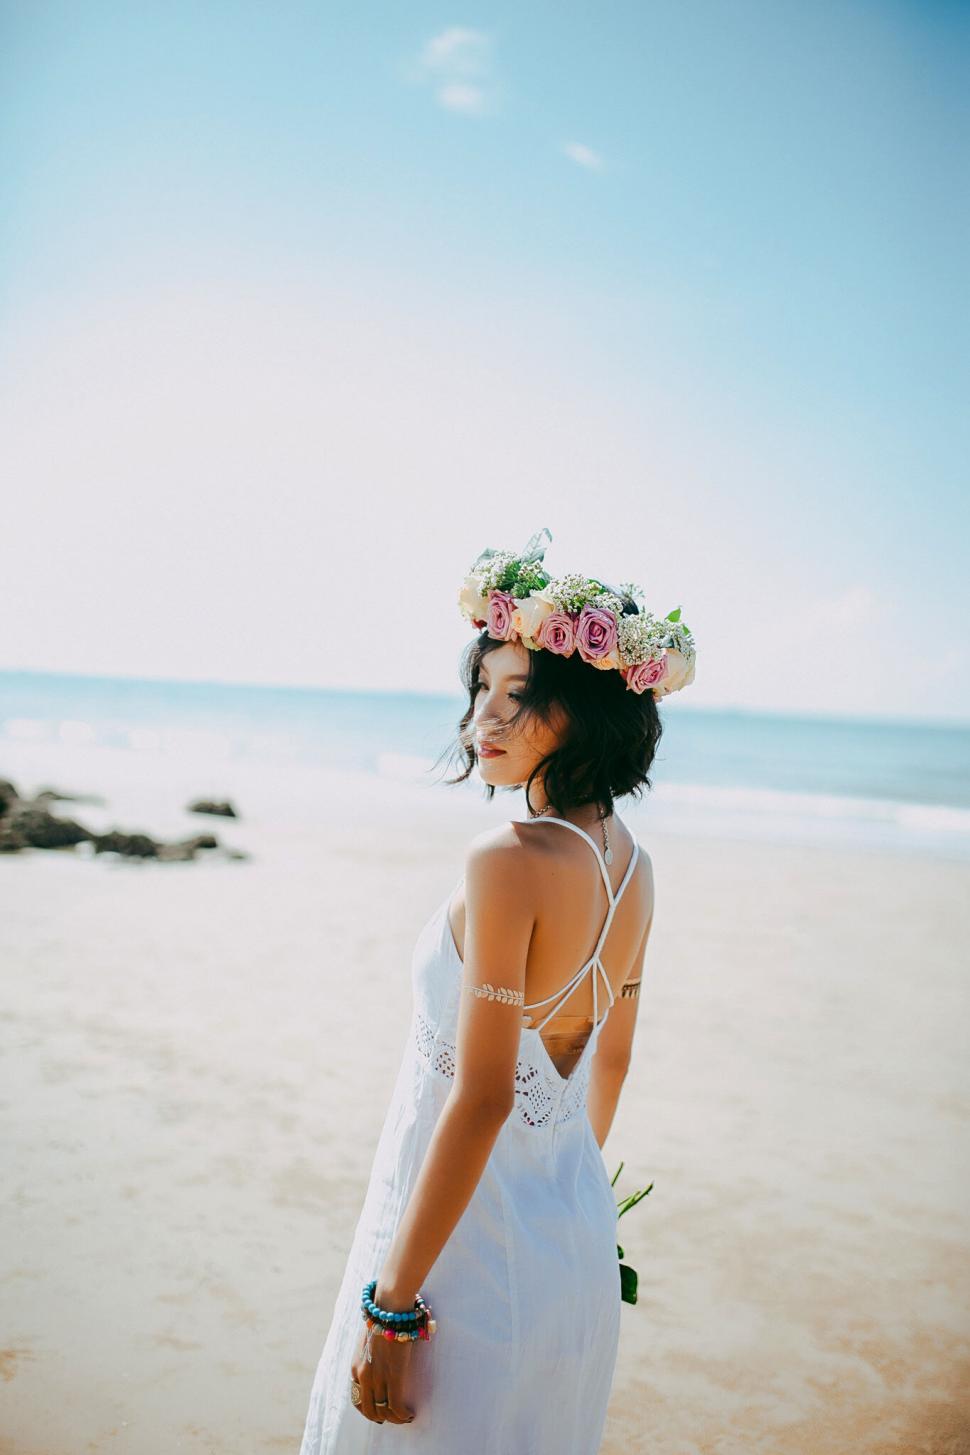 Free Image of A woman wearing a white dress and a flower crown on a beach 